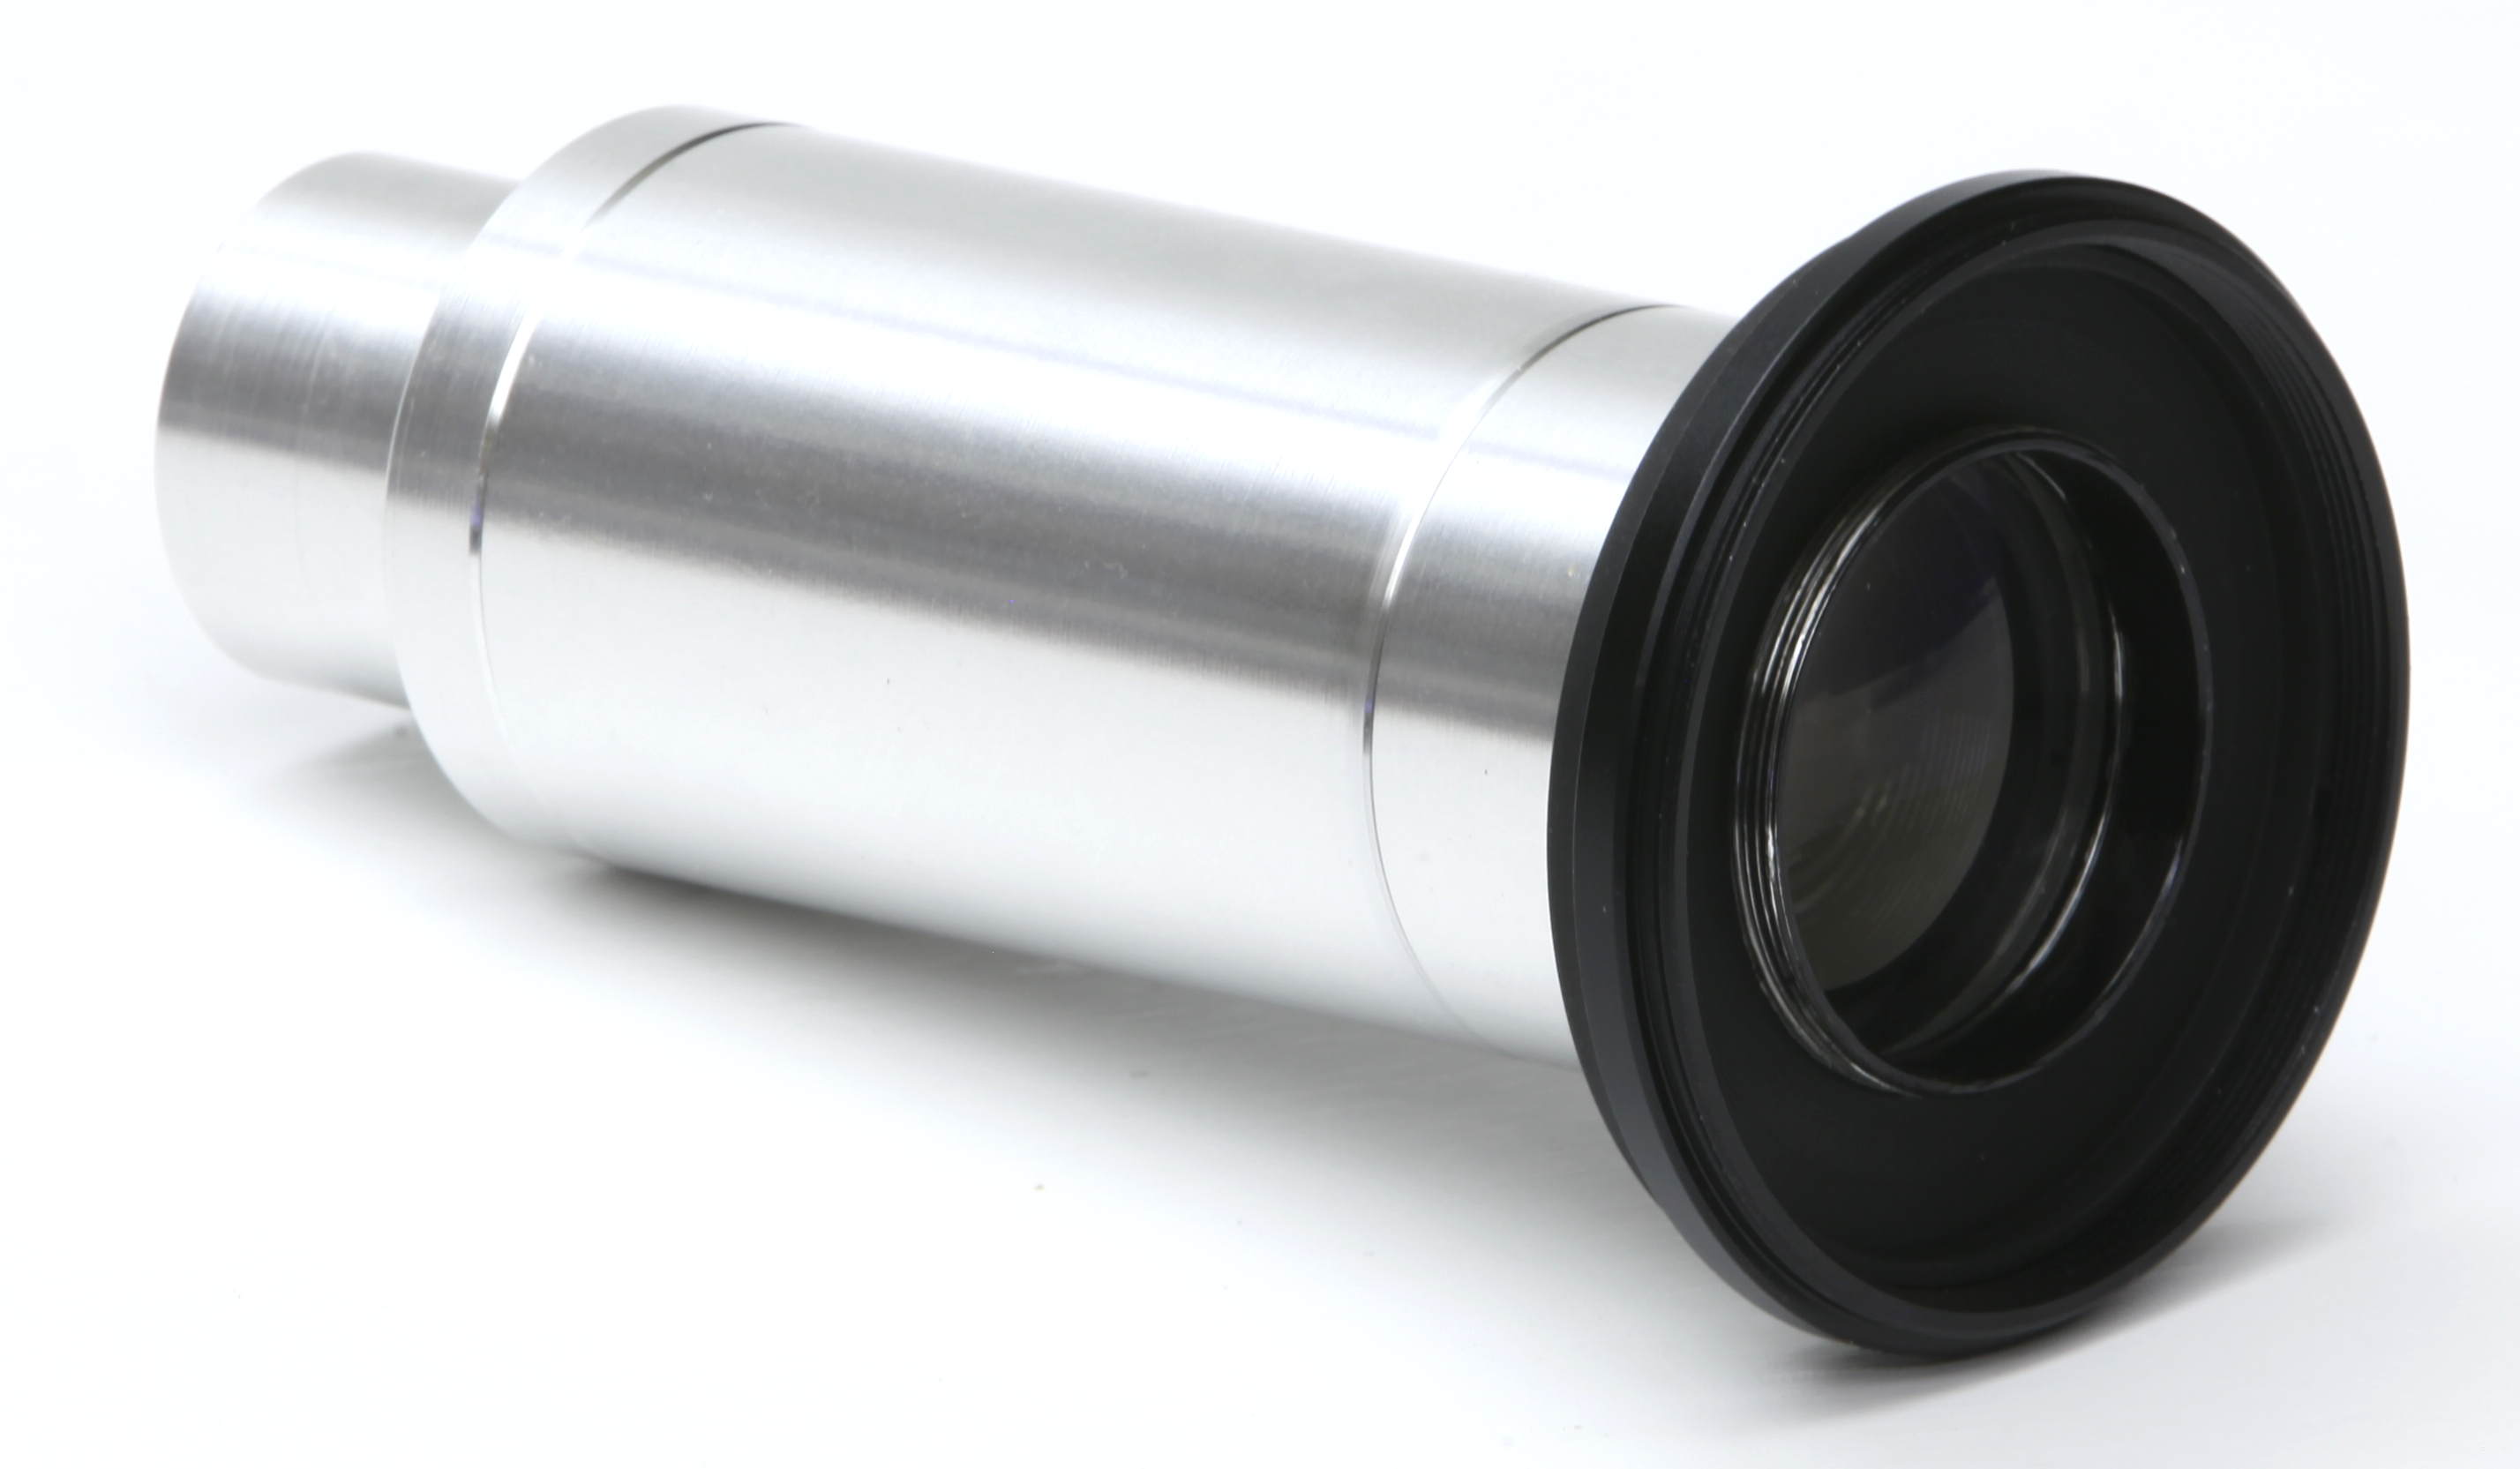 Microscope adapter for cameras and camcorders with large lenses